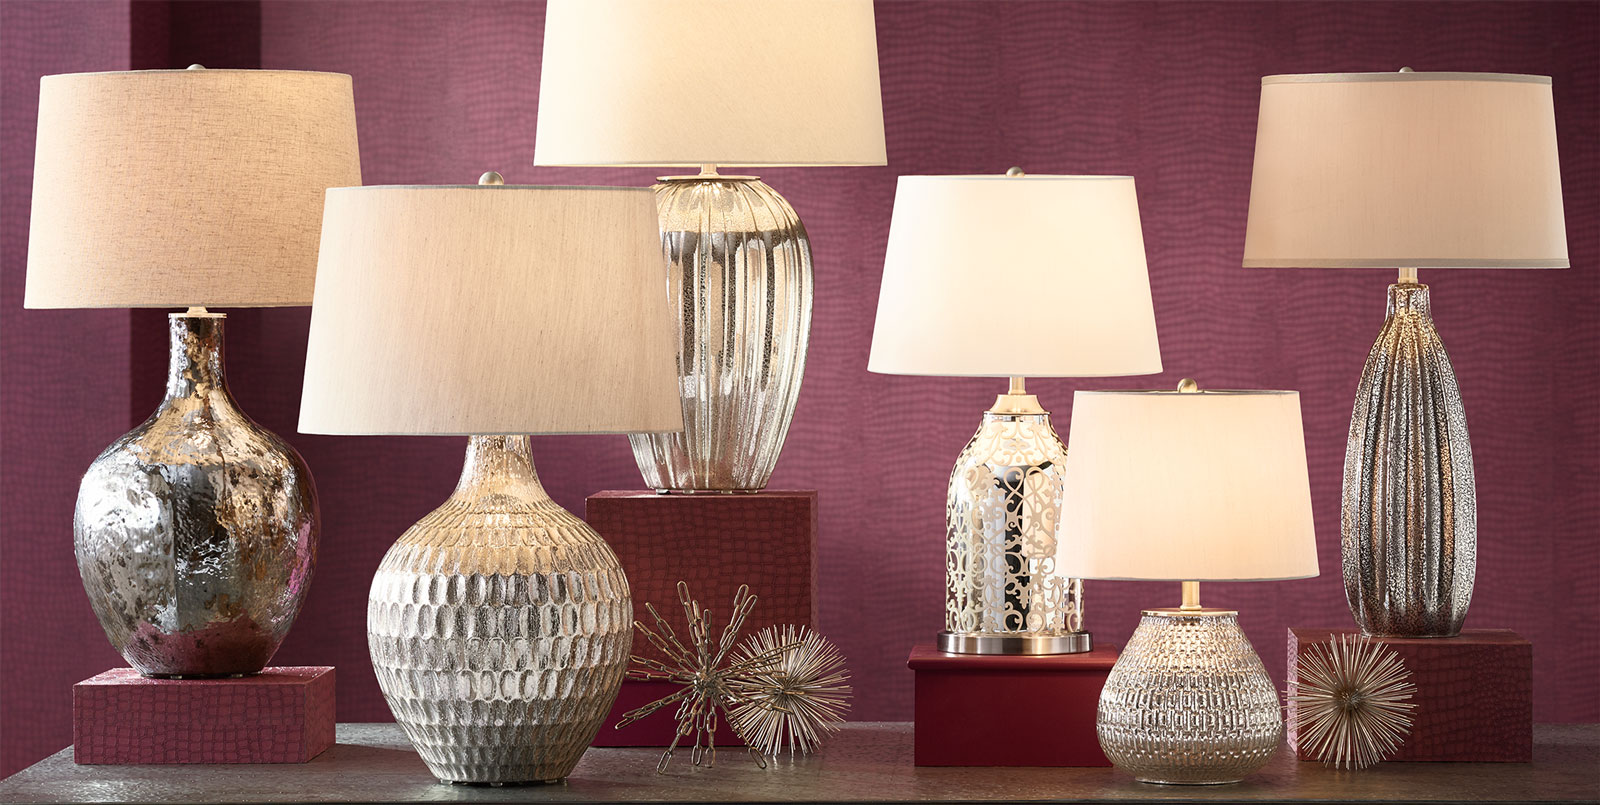 How To Select The Perfect Table Lamp, How High Should A Light Be Over Table Lamps